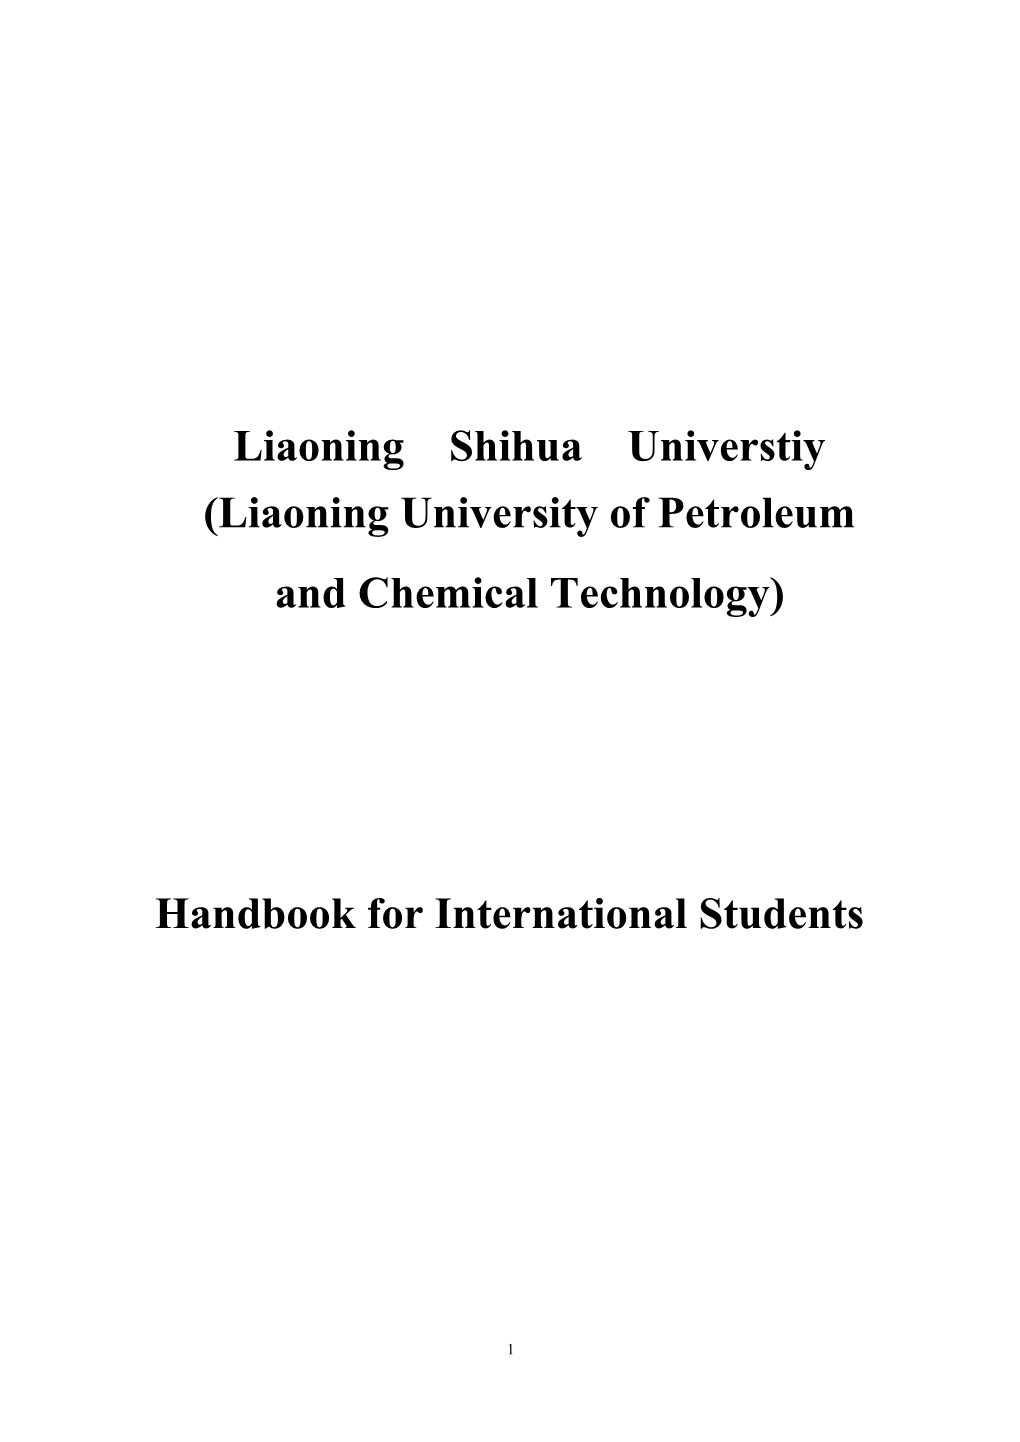 Petroleum and Chemical Technology of Liaoning University